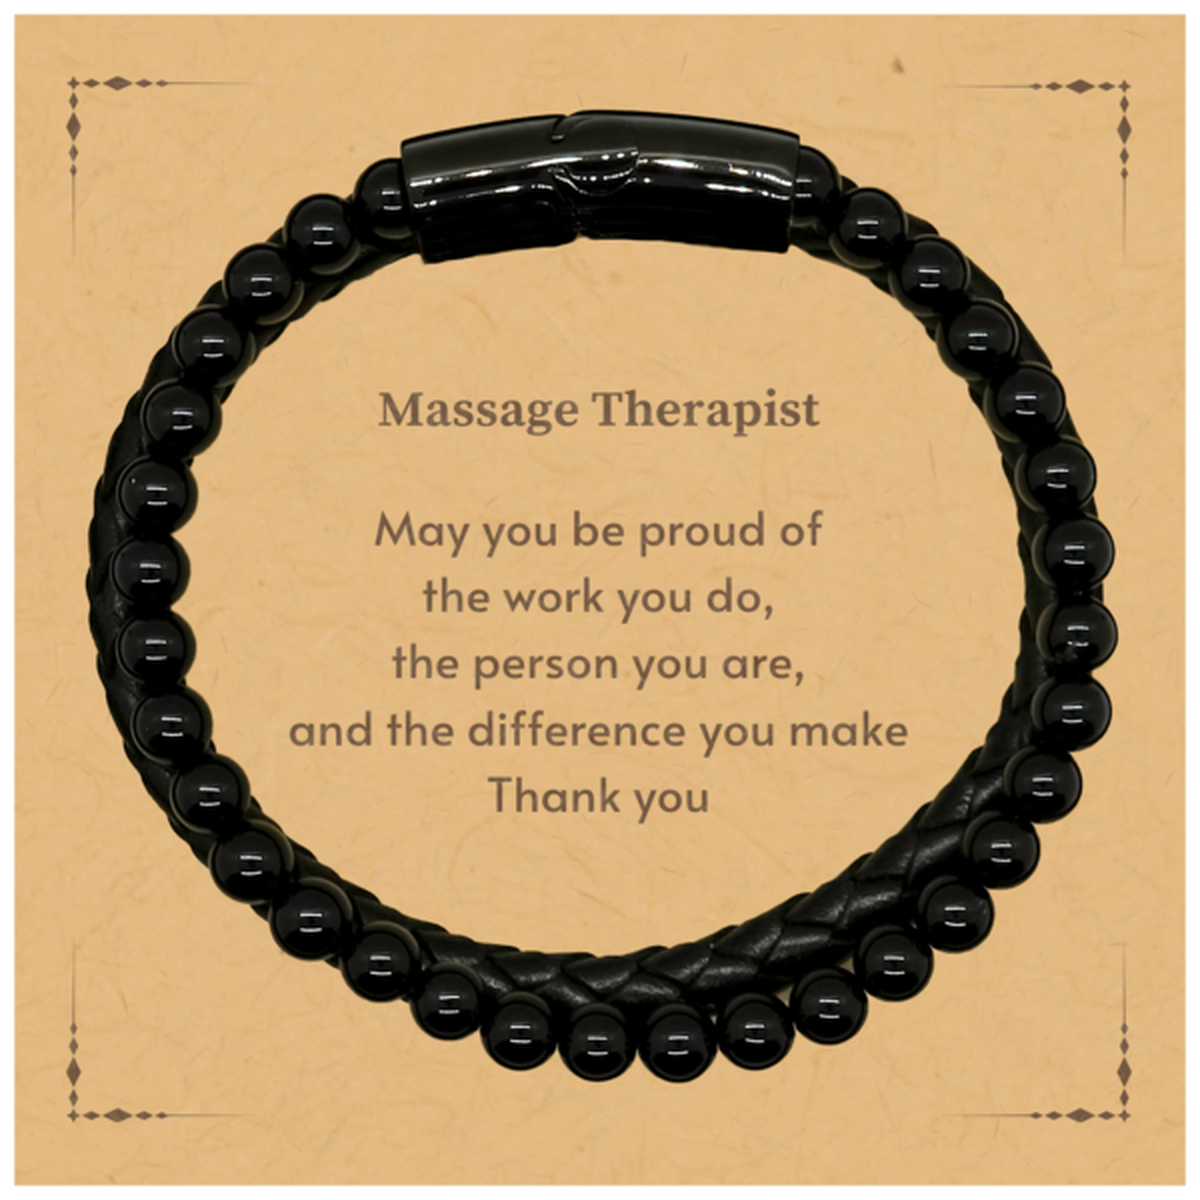 Heartwarming Stone Leather Bracelets Retirement Coworkers Gifts for Massage Therapist, Massage Therapist May You be proud of the work you do, the person you are Gifts for Boss Men Women Friends